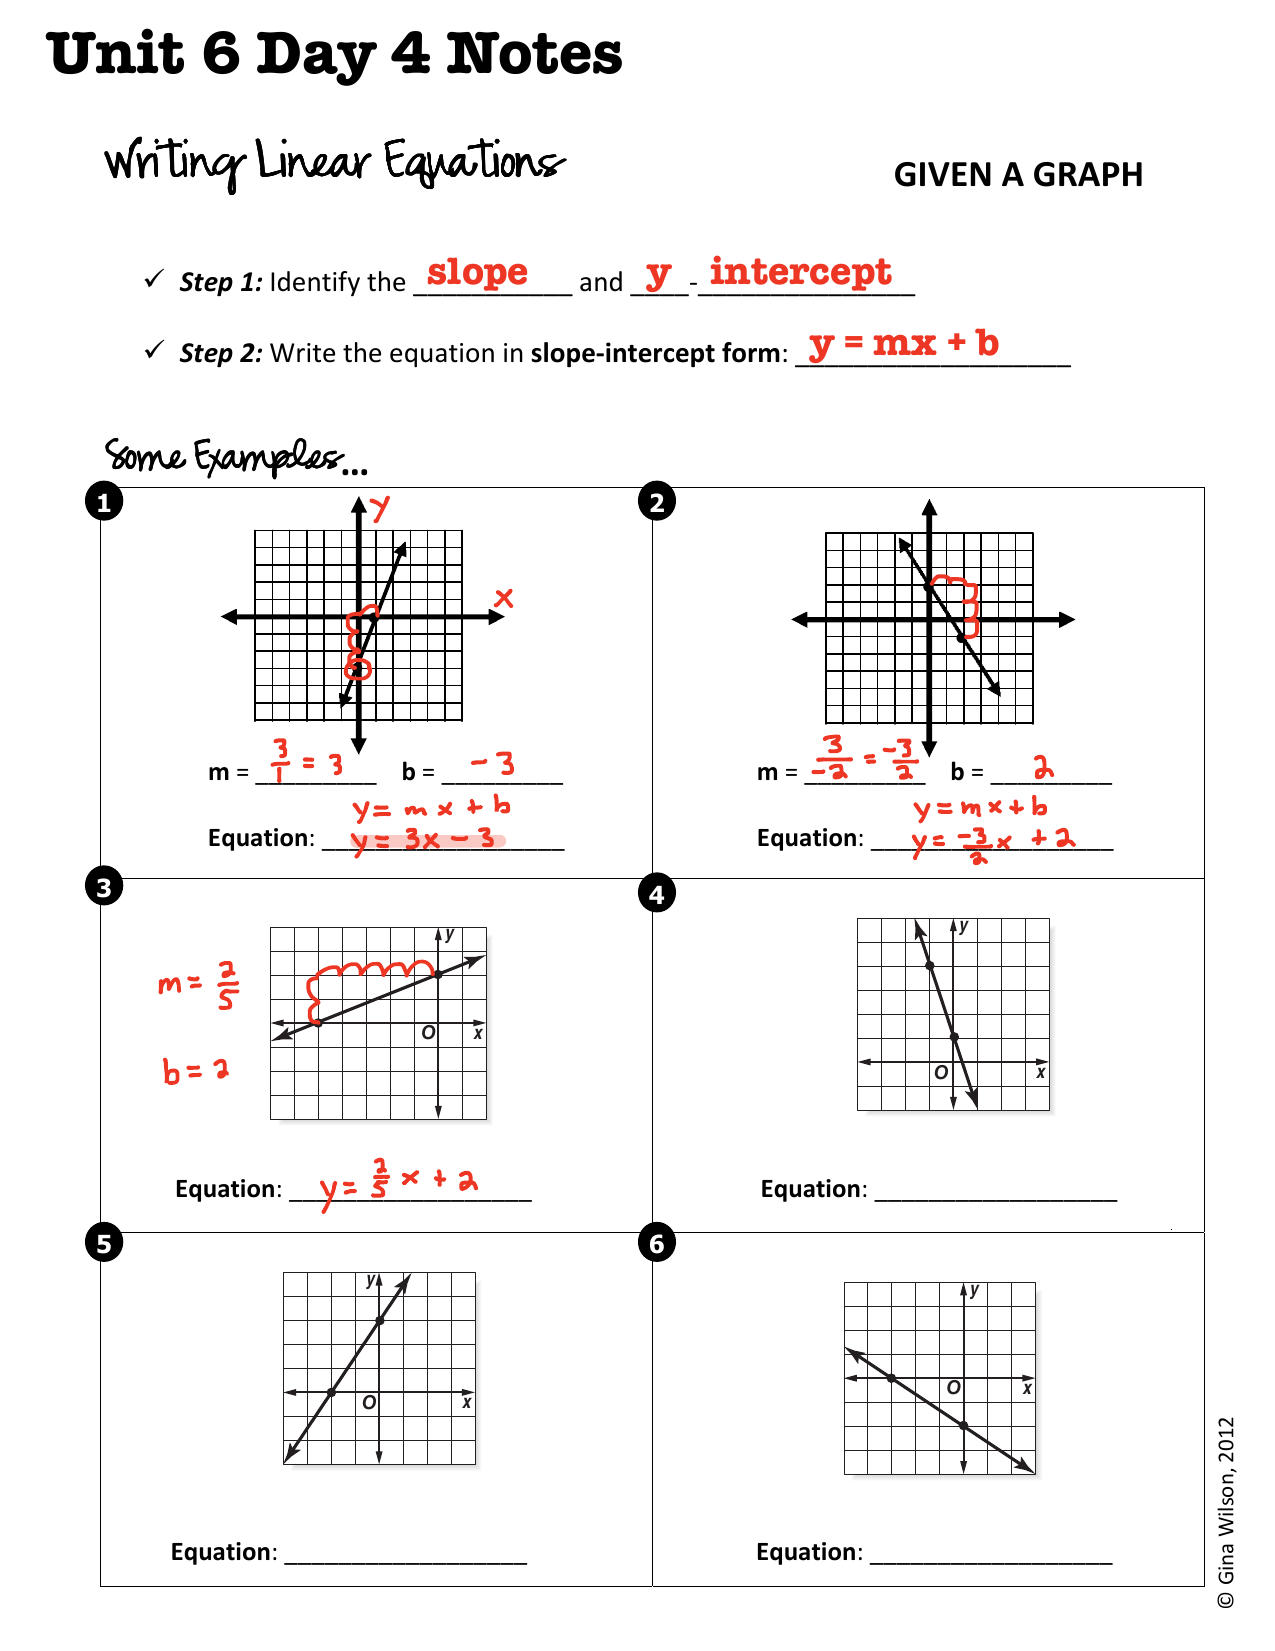 Writing Linear Equations With Writing Linear Equations Worksheet